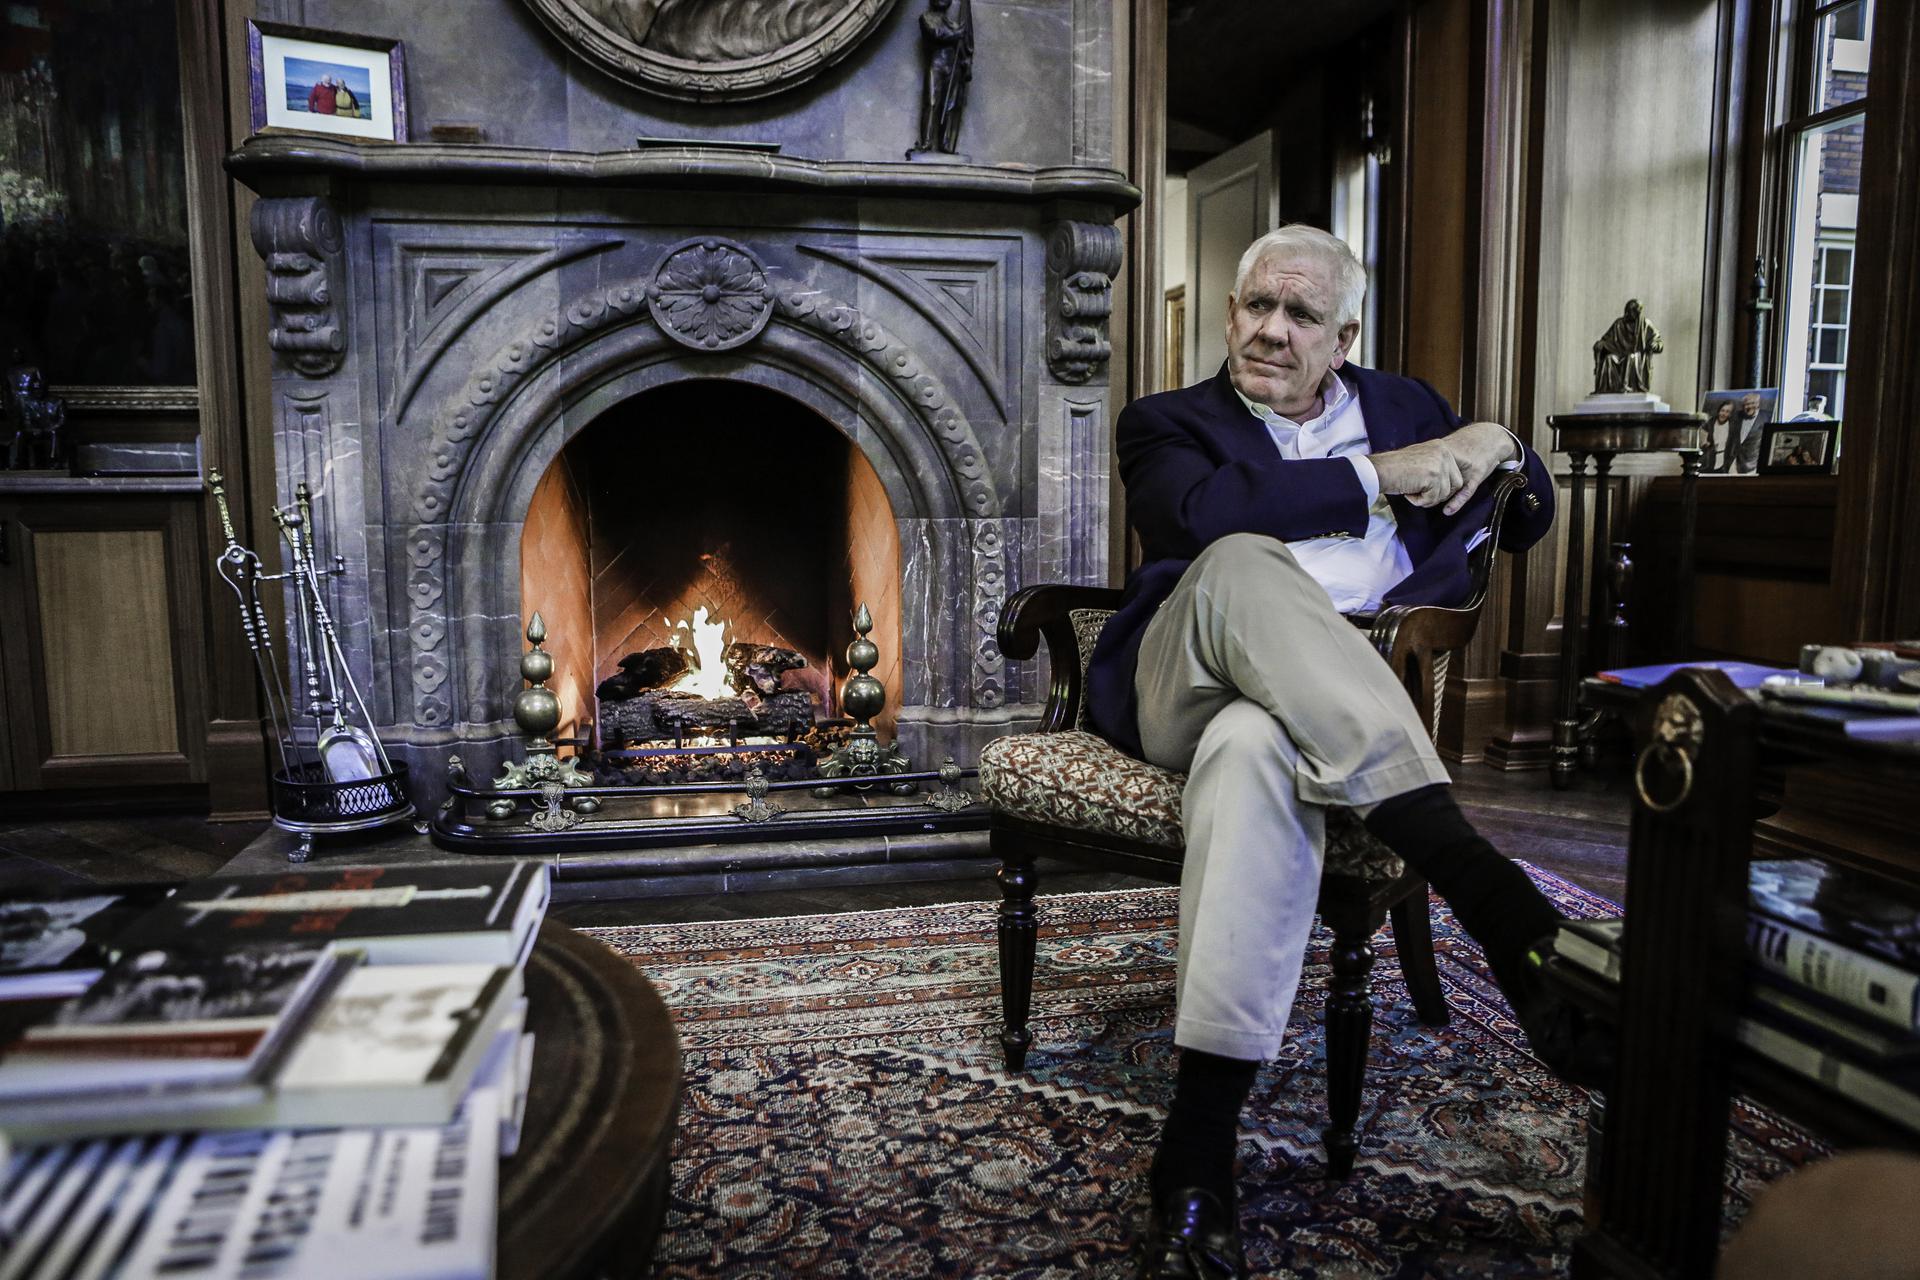 Harlan Crow, friend of Clarence Thomas and collector of Nazi memorabilia. (Chris Goodney/Bloomberg via Getty)